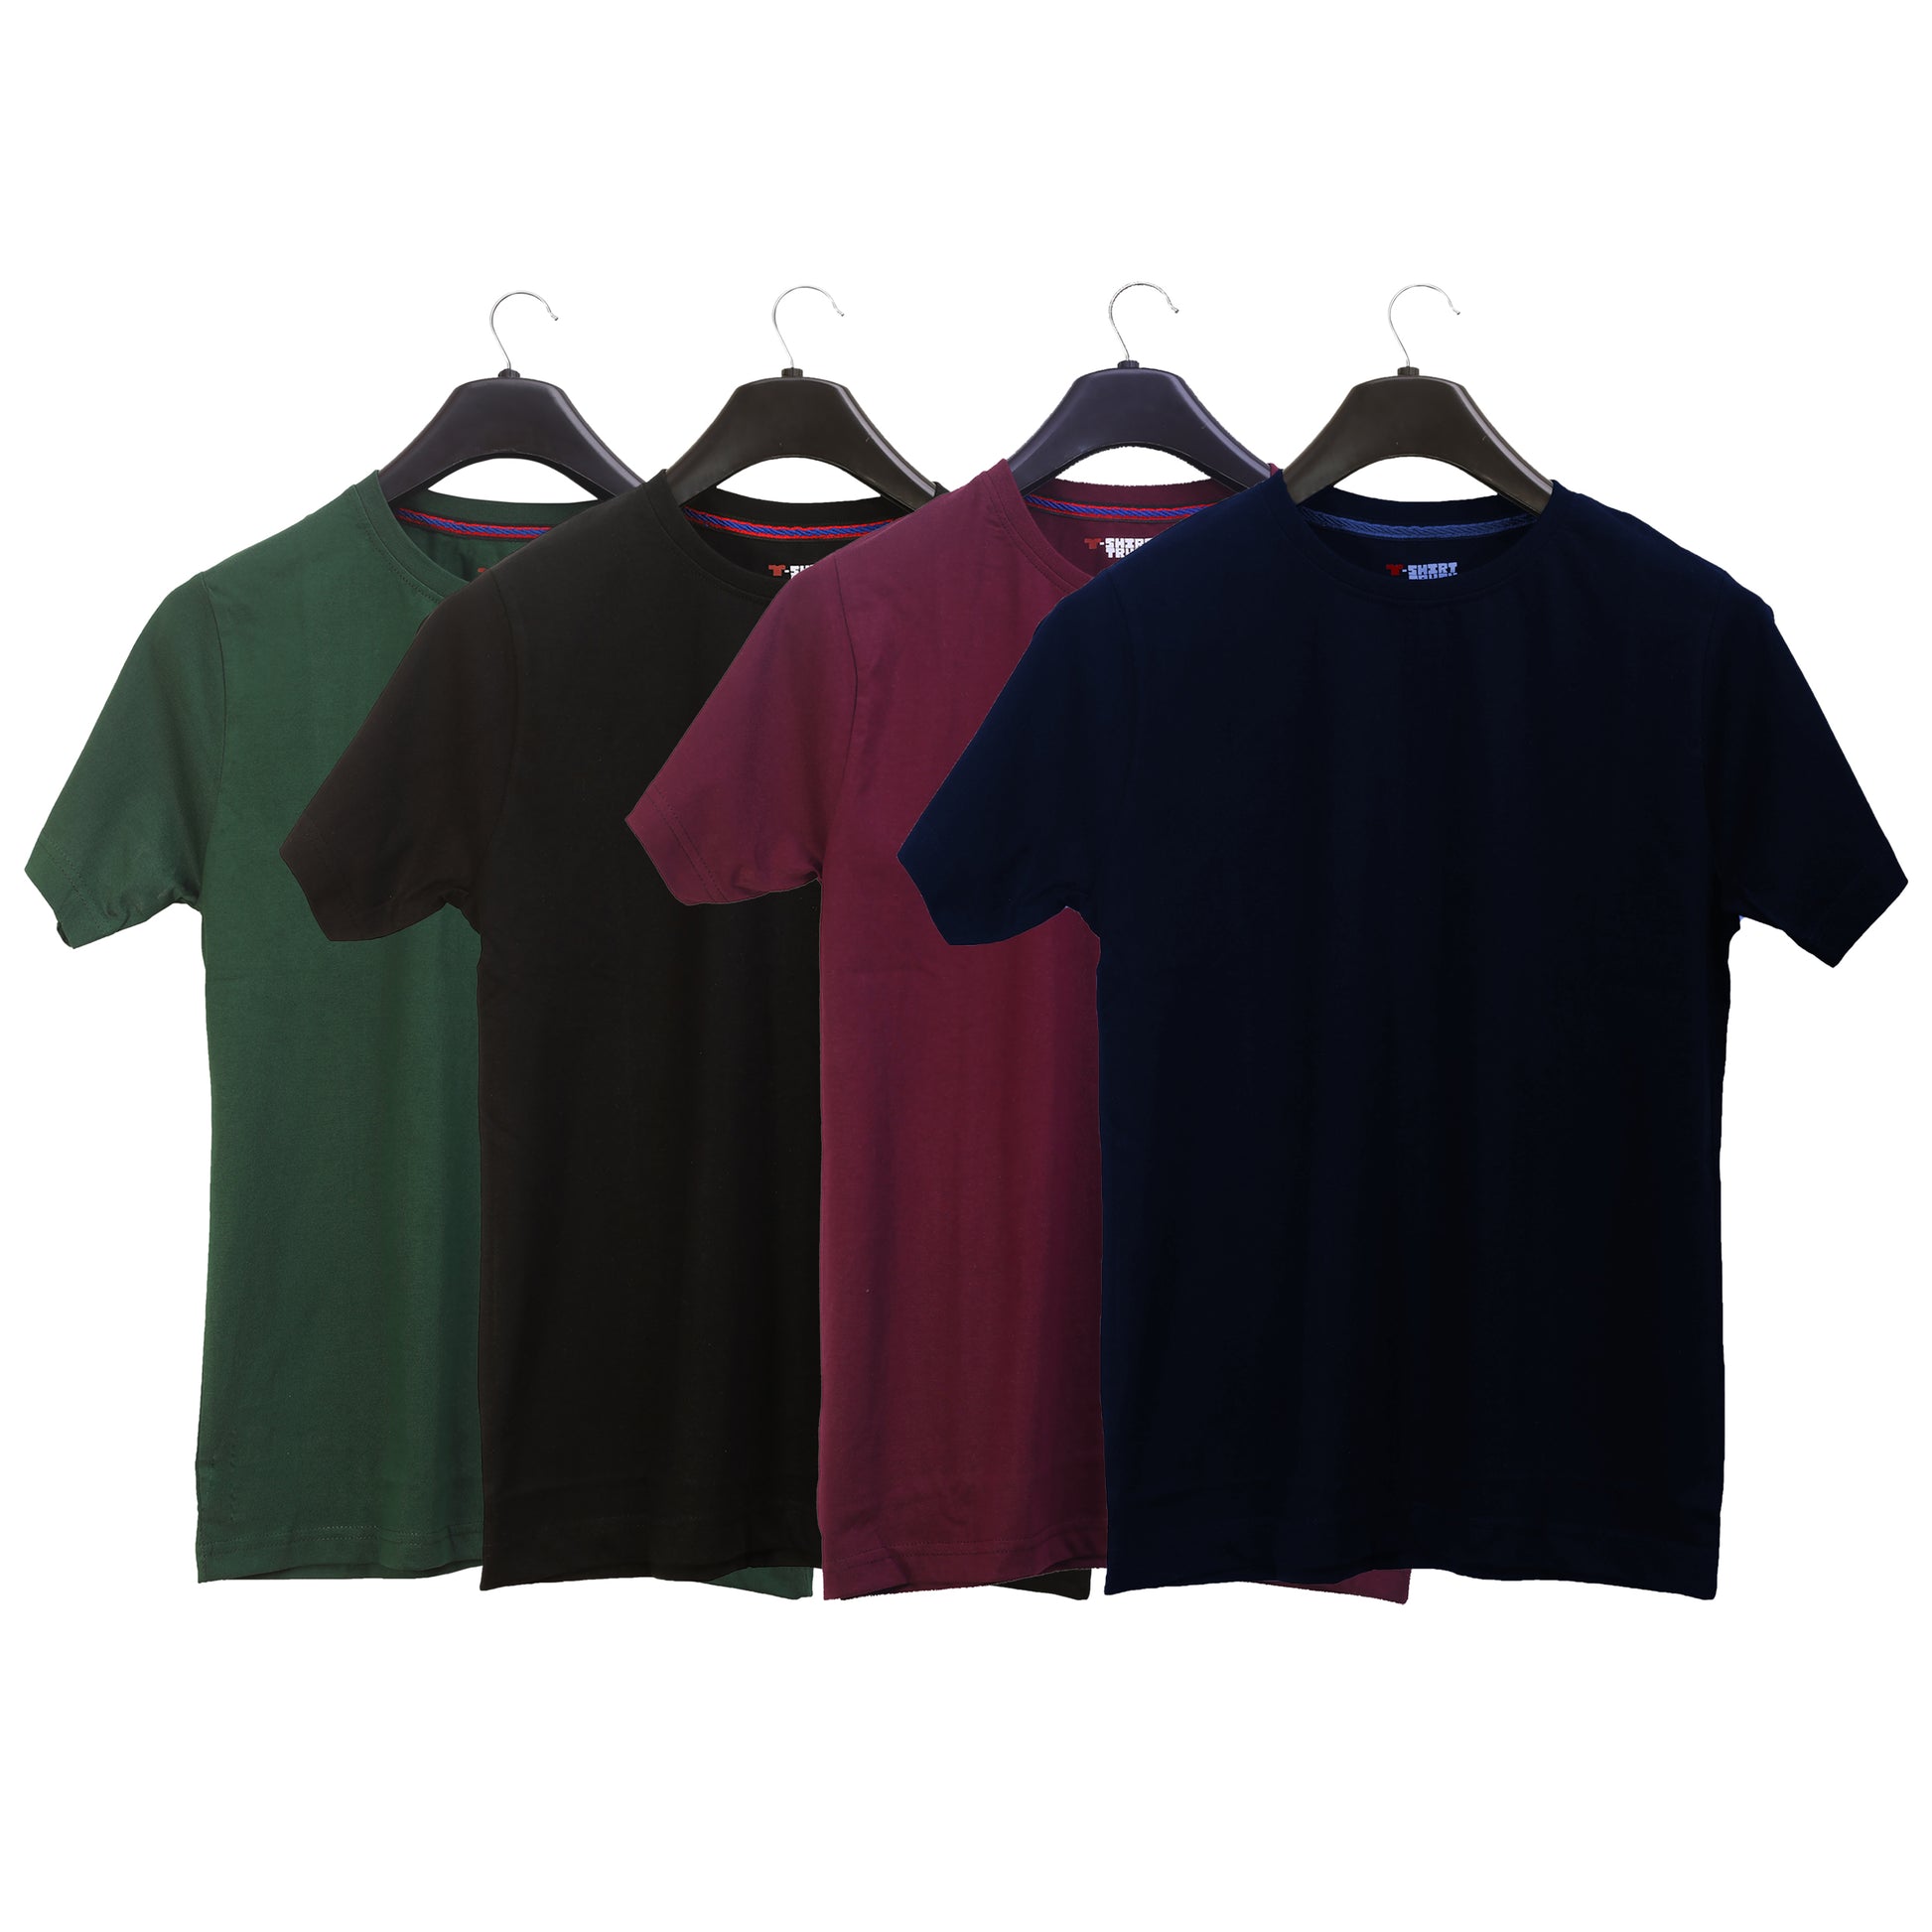 Unisex Round Neck Plain Solid Combo Pack of 4 T-shirts Black, Green, Blue & Maroon